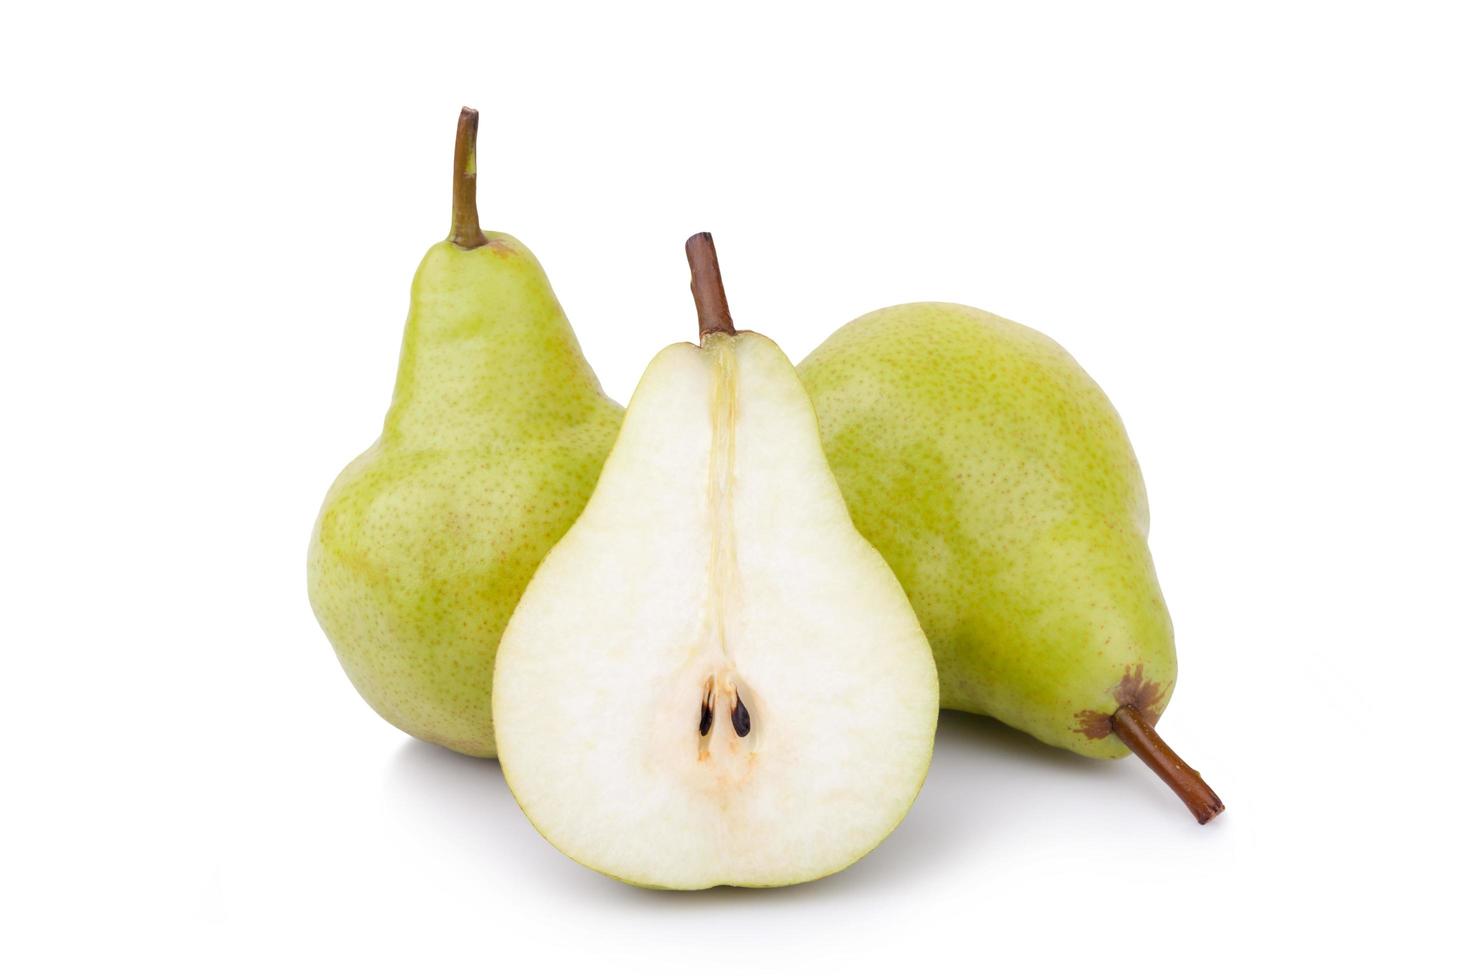 pears isolated on white background photo